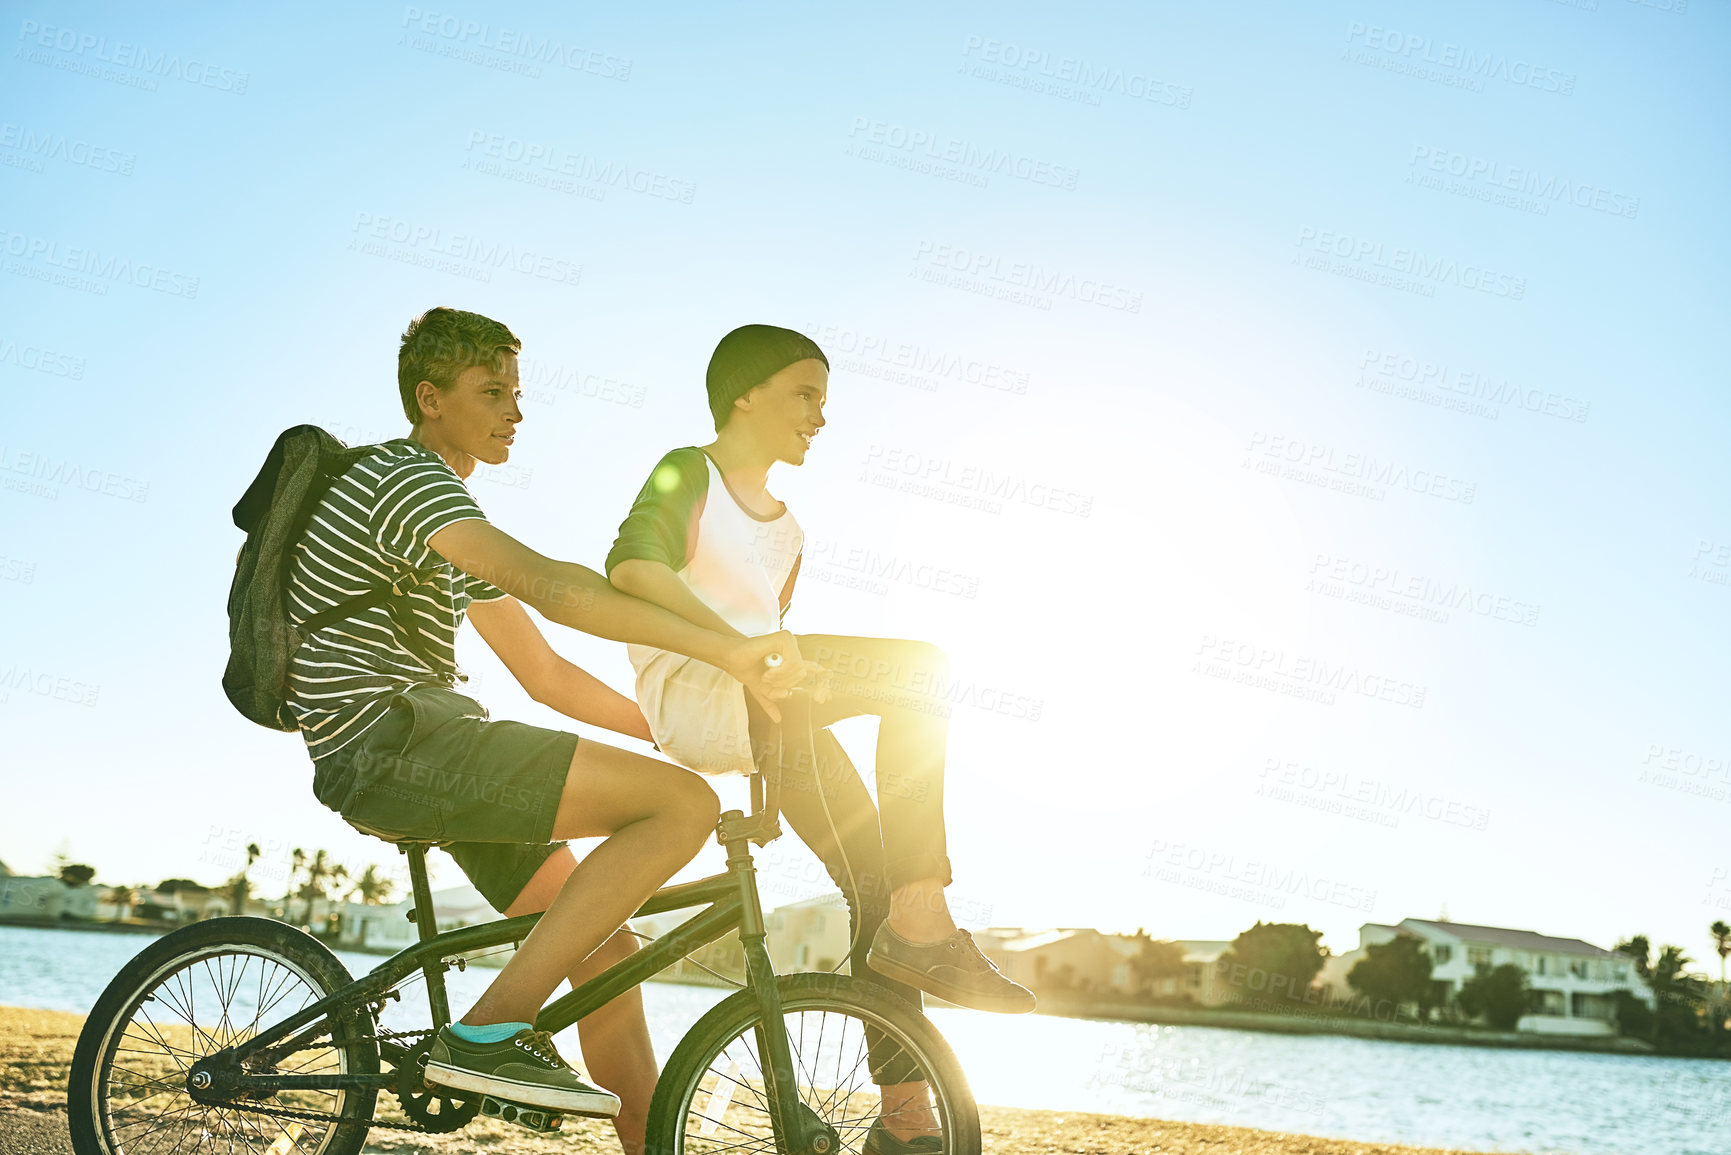 Buy stock photo Cropped shot of a young boy giving his younger brother a lift on a bicycle outside